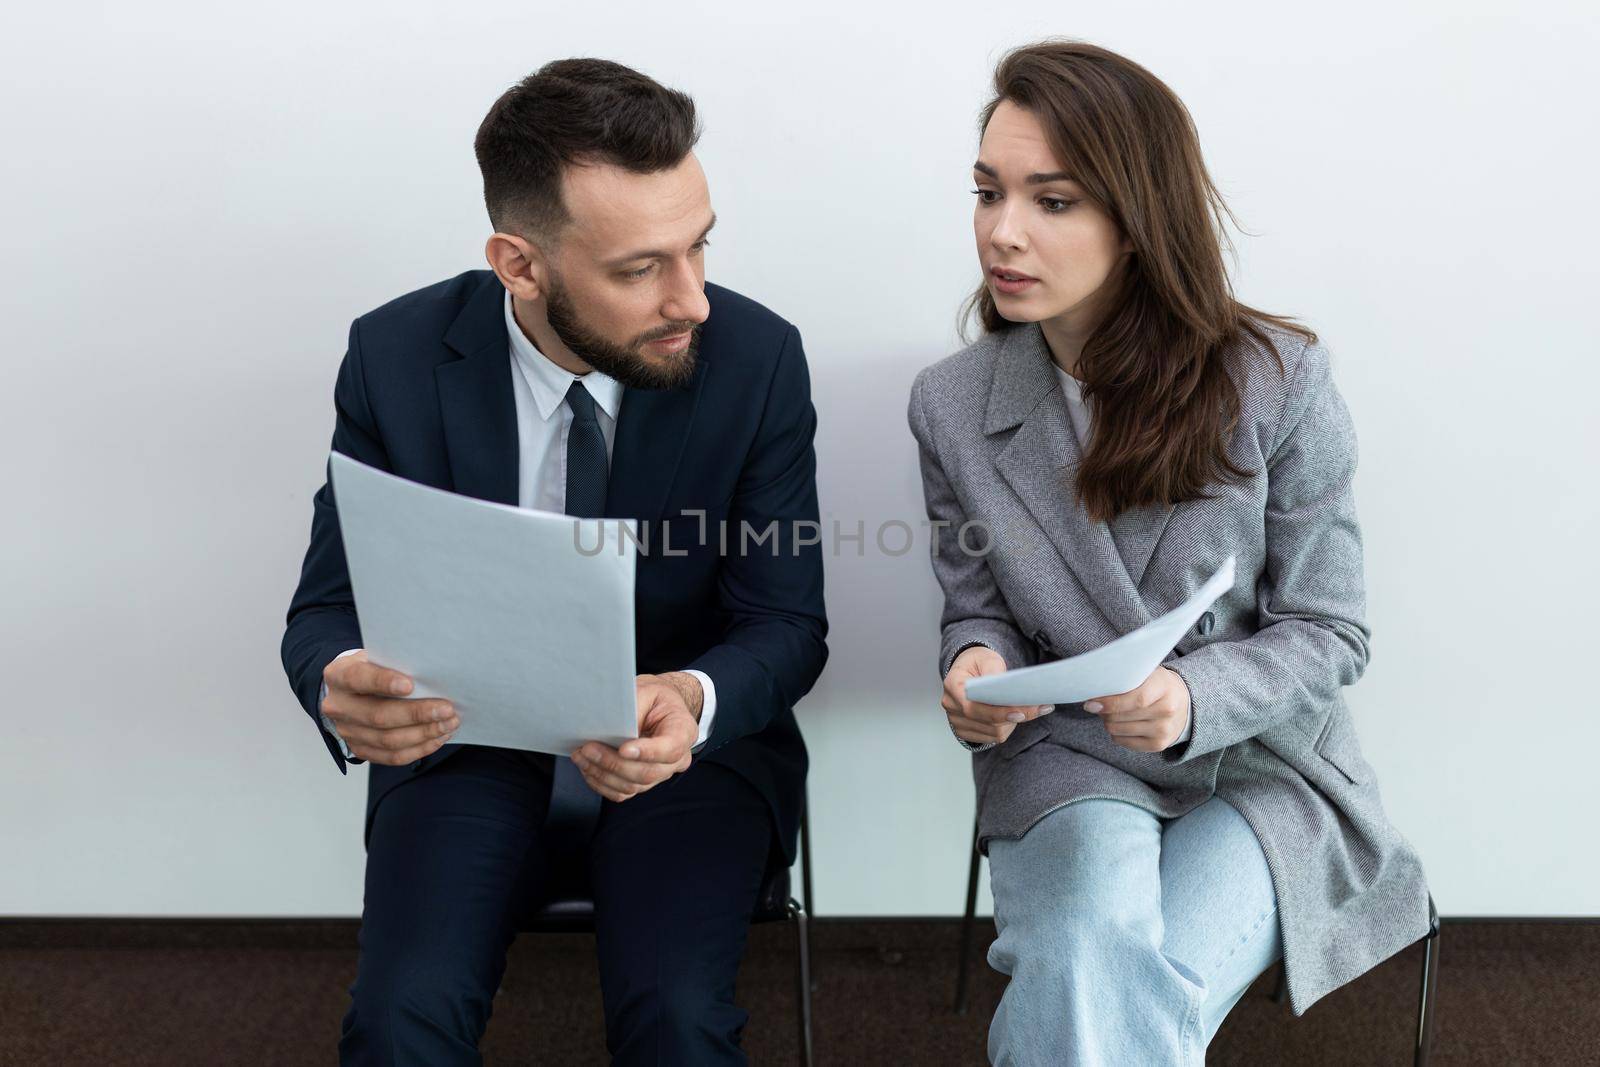 job seekers communicate before the interview with the manager.